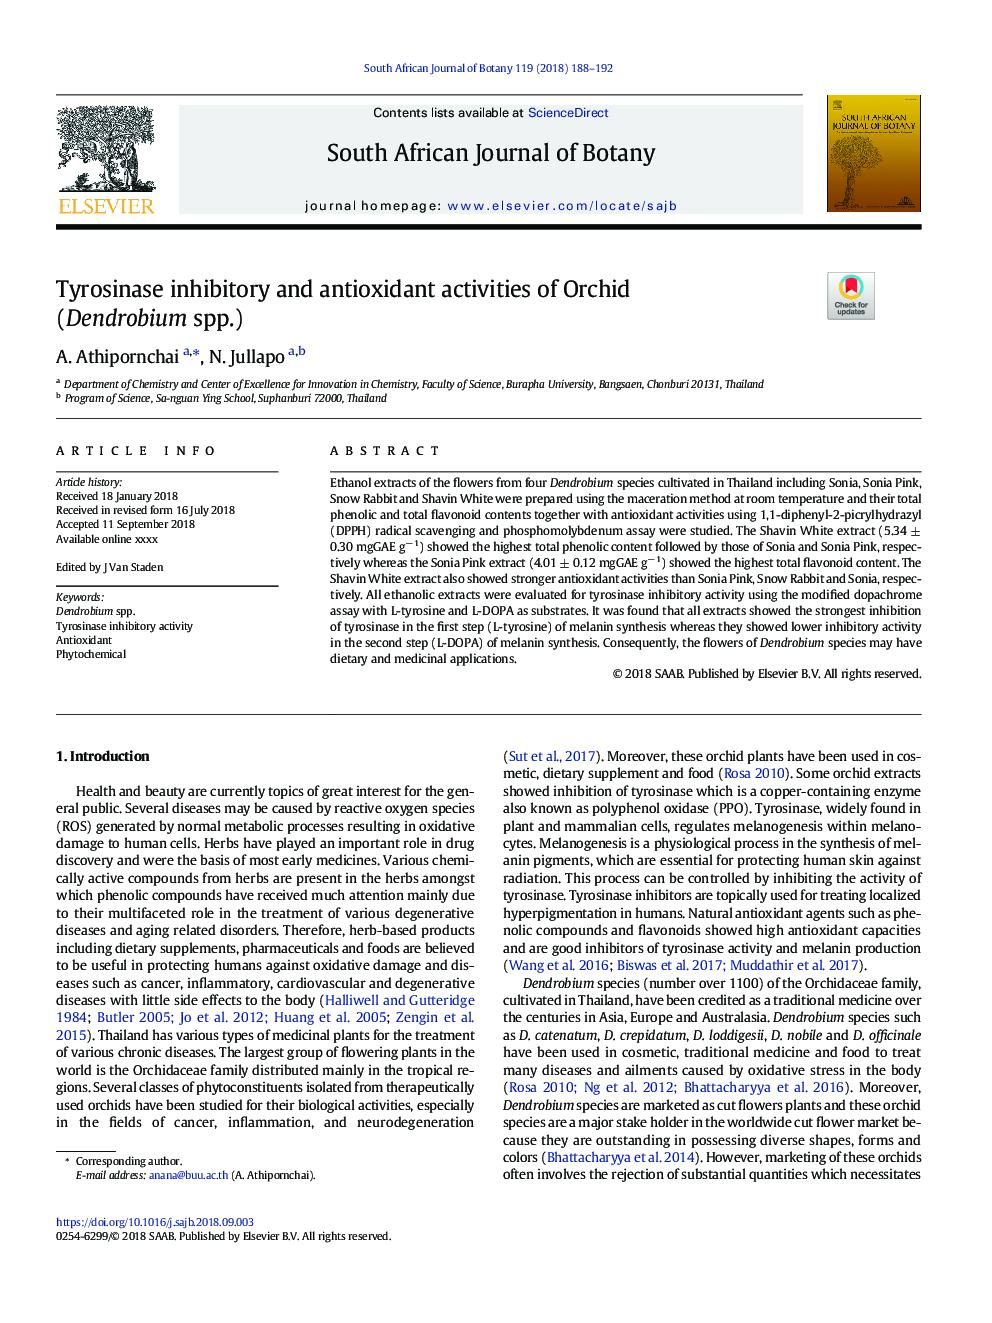 Tyrosinase inhibitory and antioxidant activities of Orchid (Dendrobium spp.)